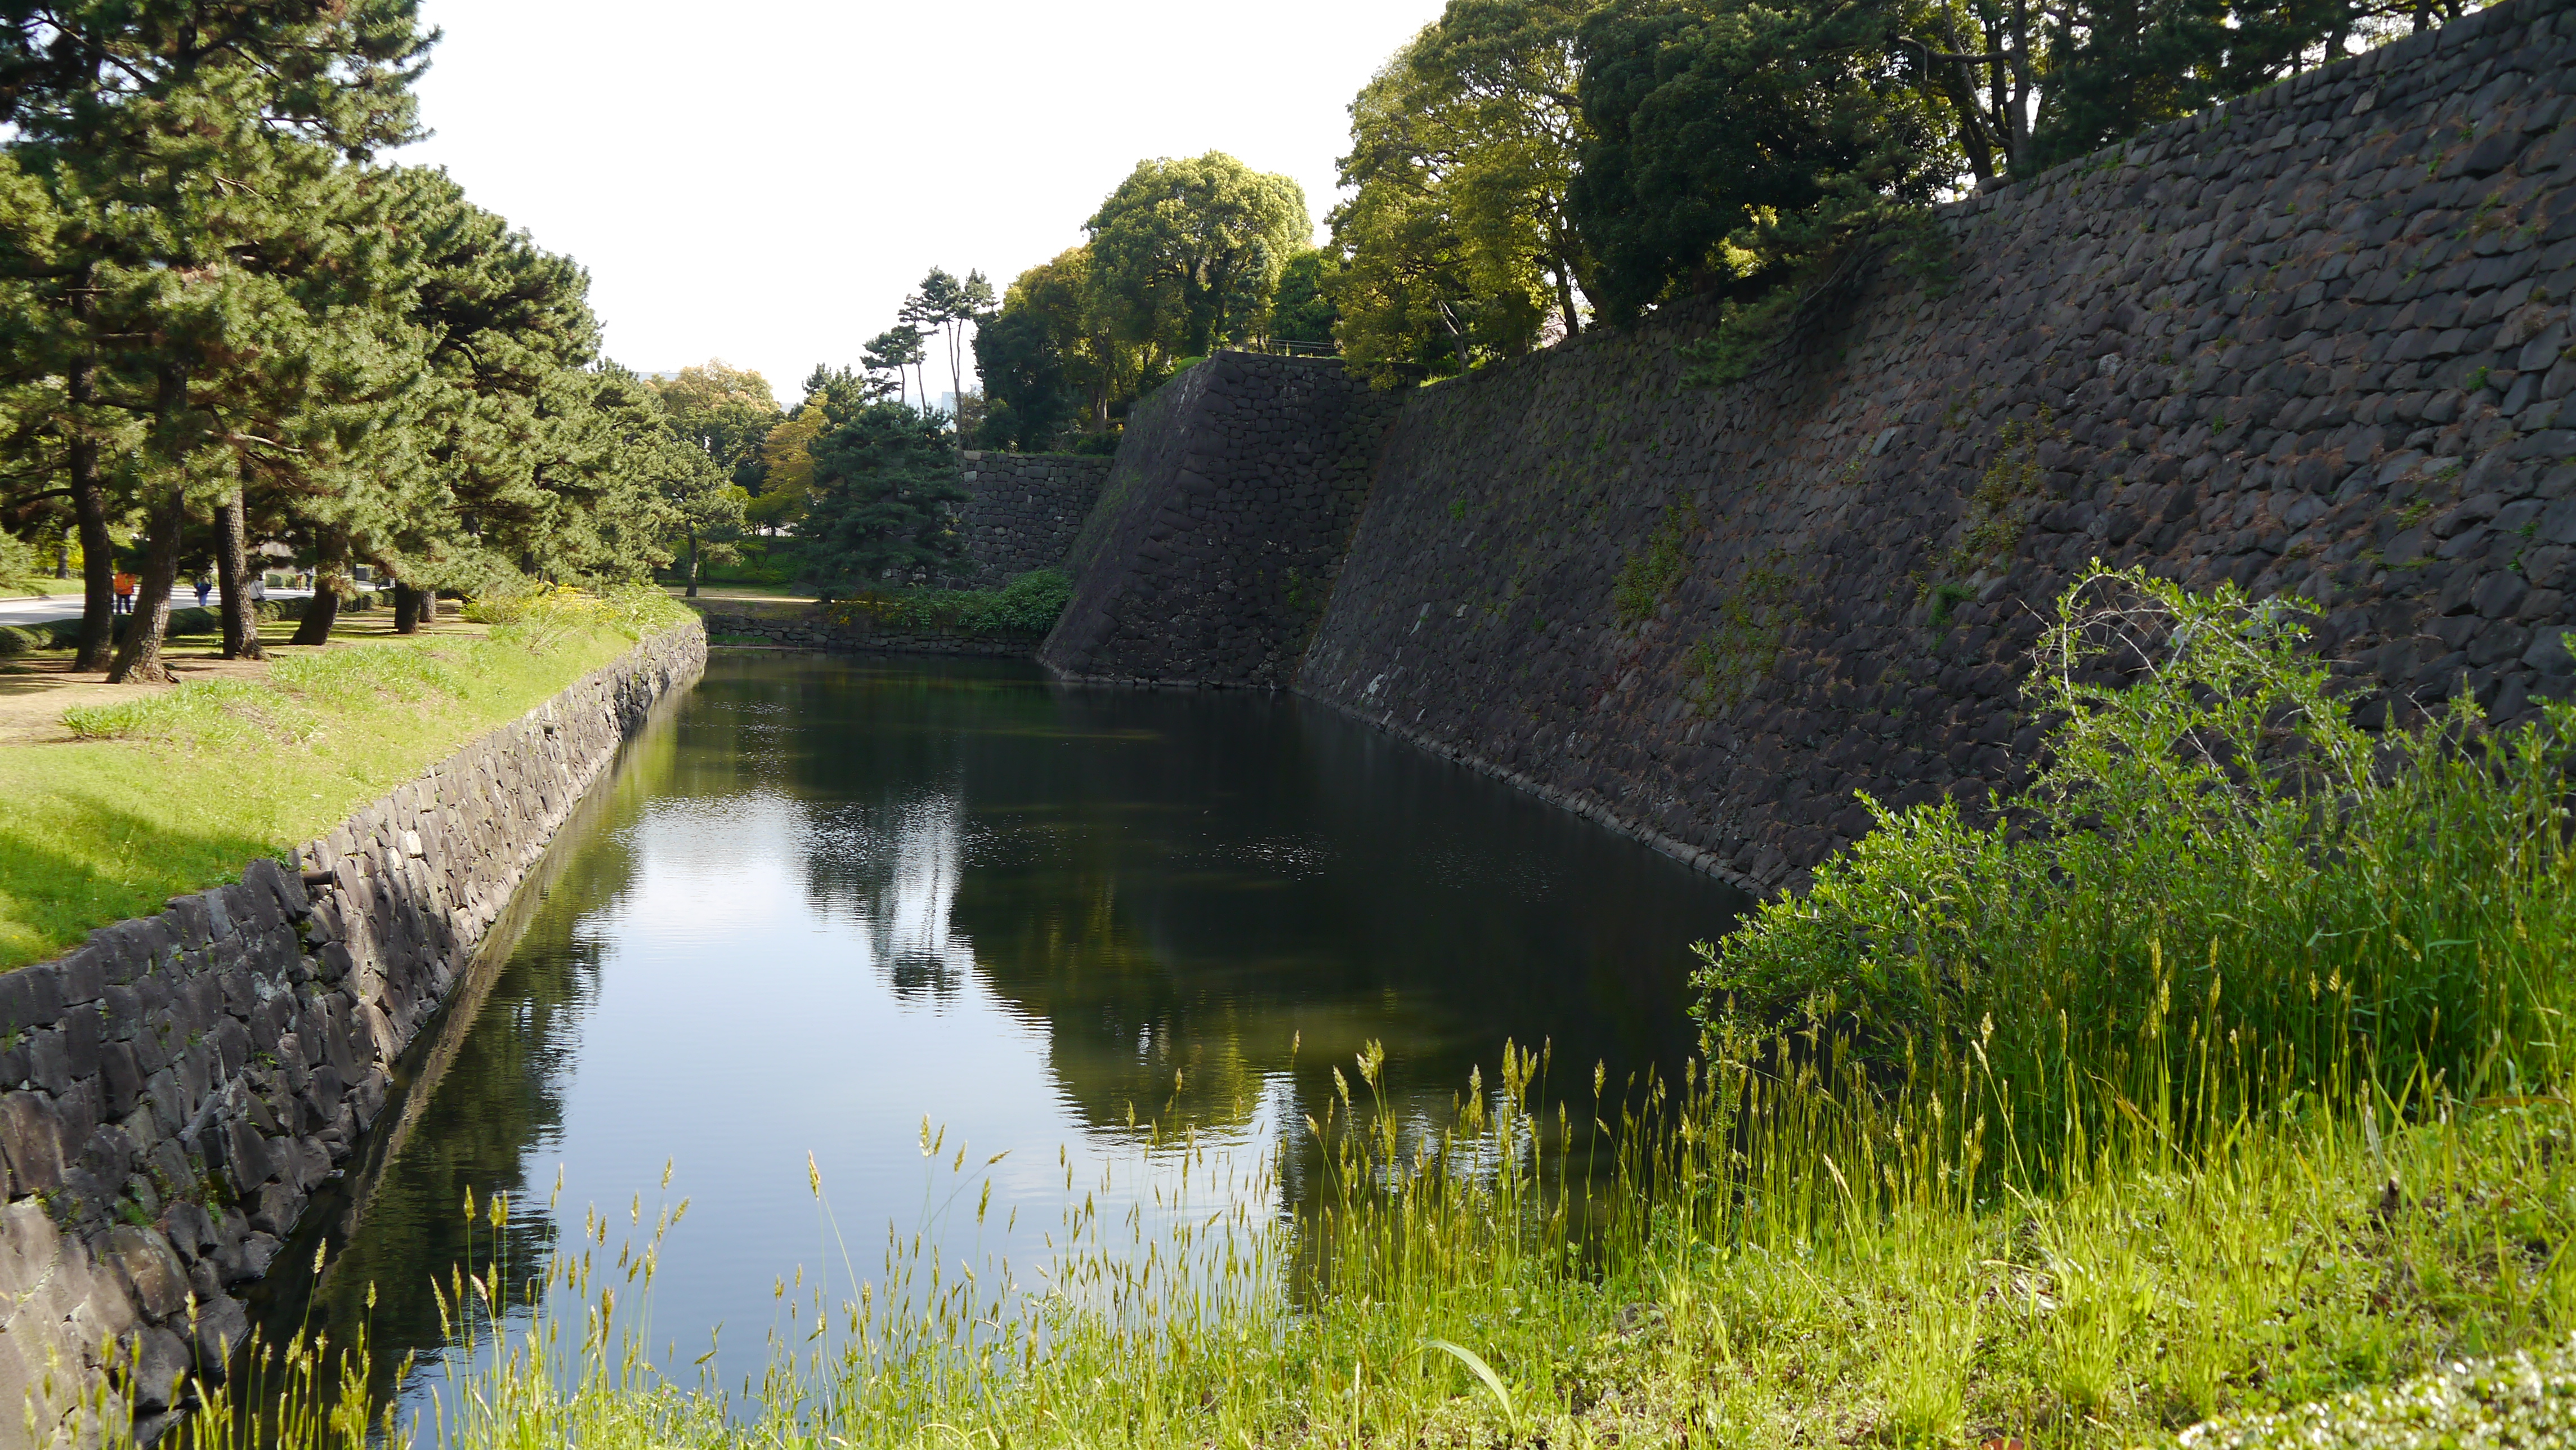 The imperial palace walls